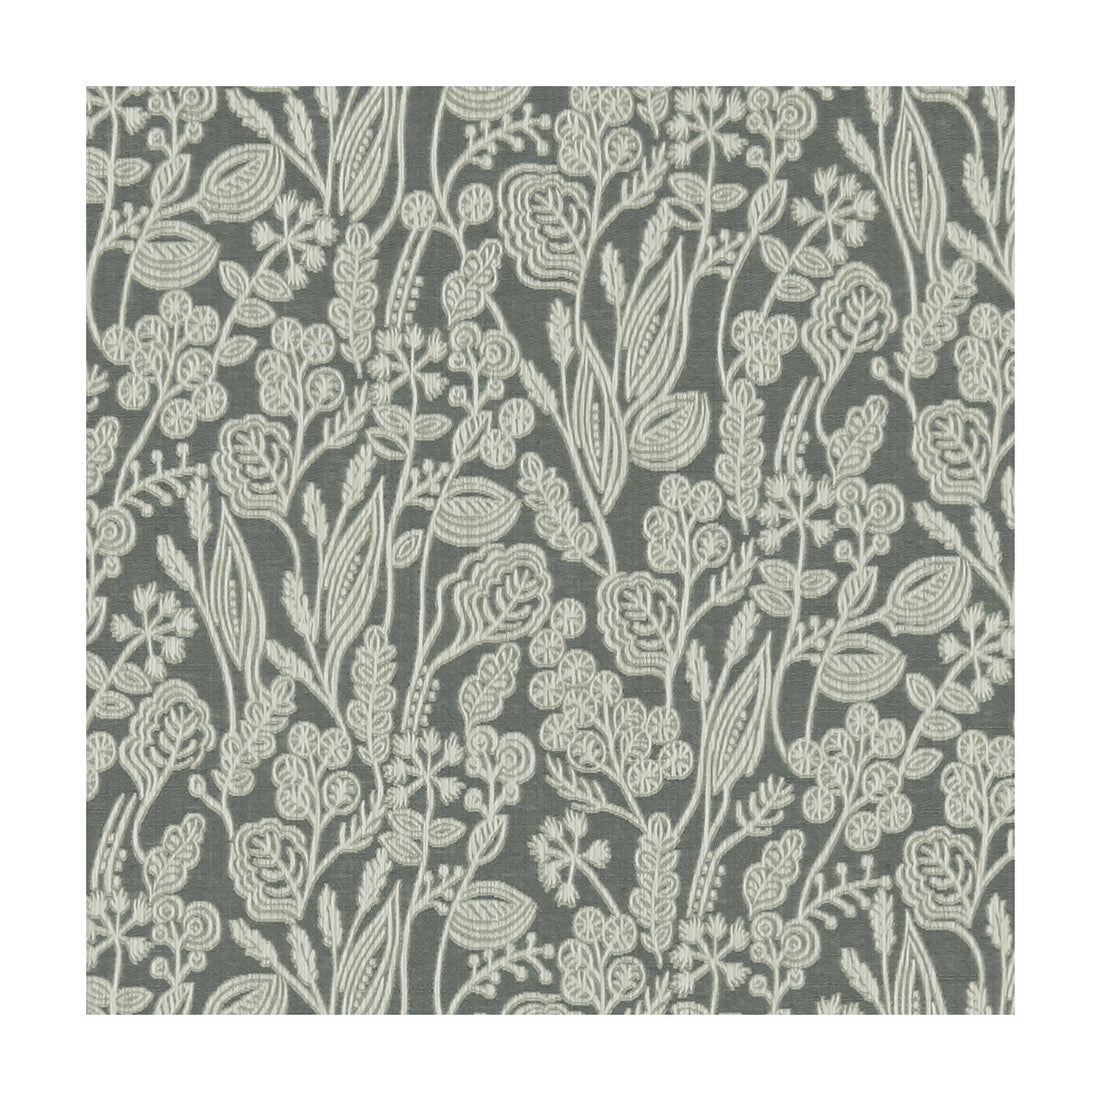 Marbury fabric in charcoal color - pattern F1230/02.CAC.0 - by Clarke And Clarke in the Marbury By Studio G For C&amp;C collection